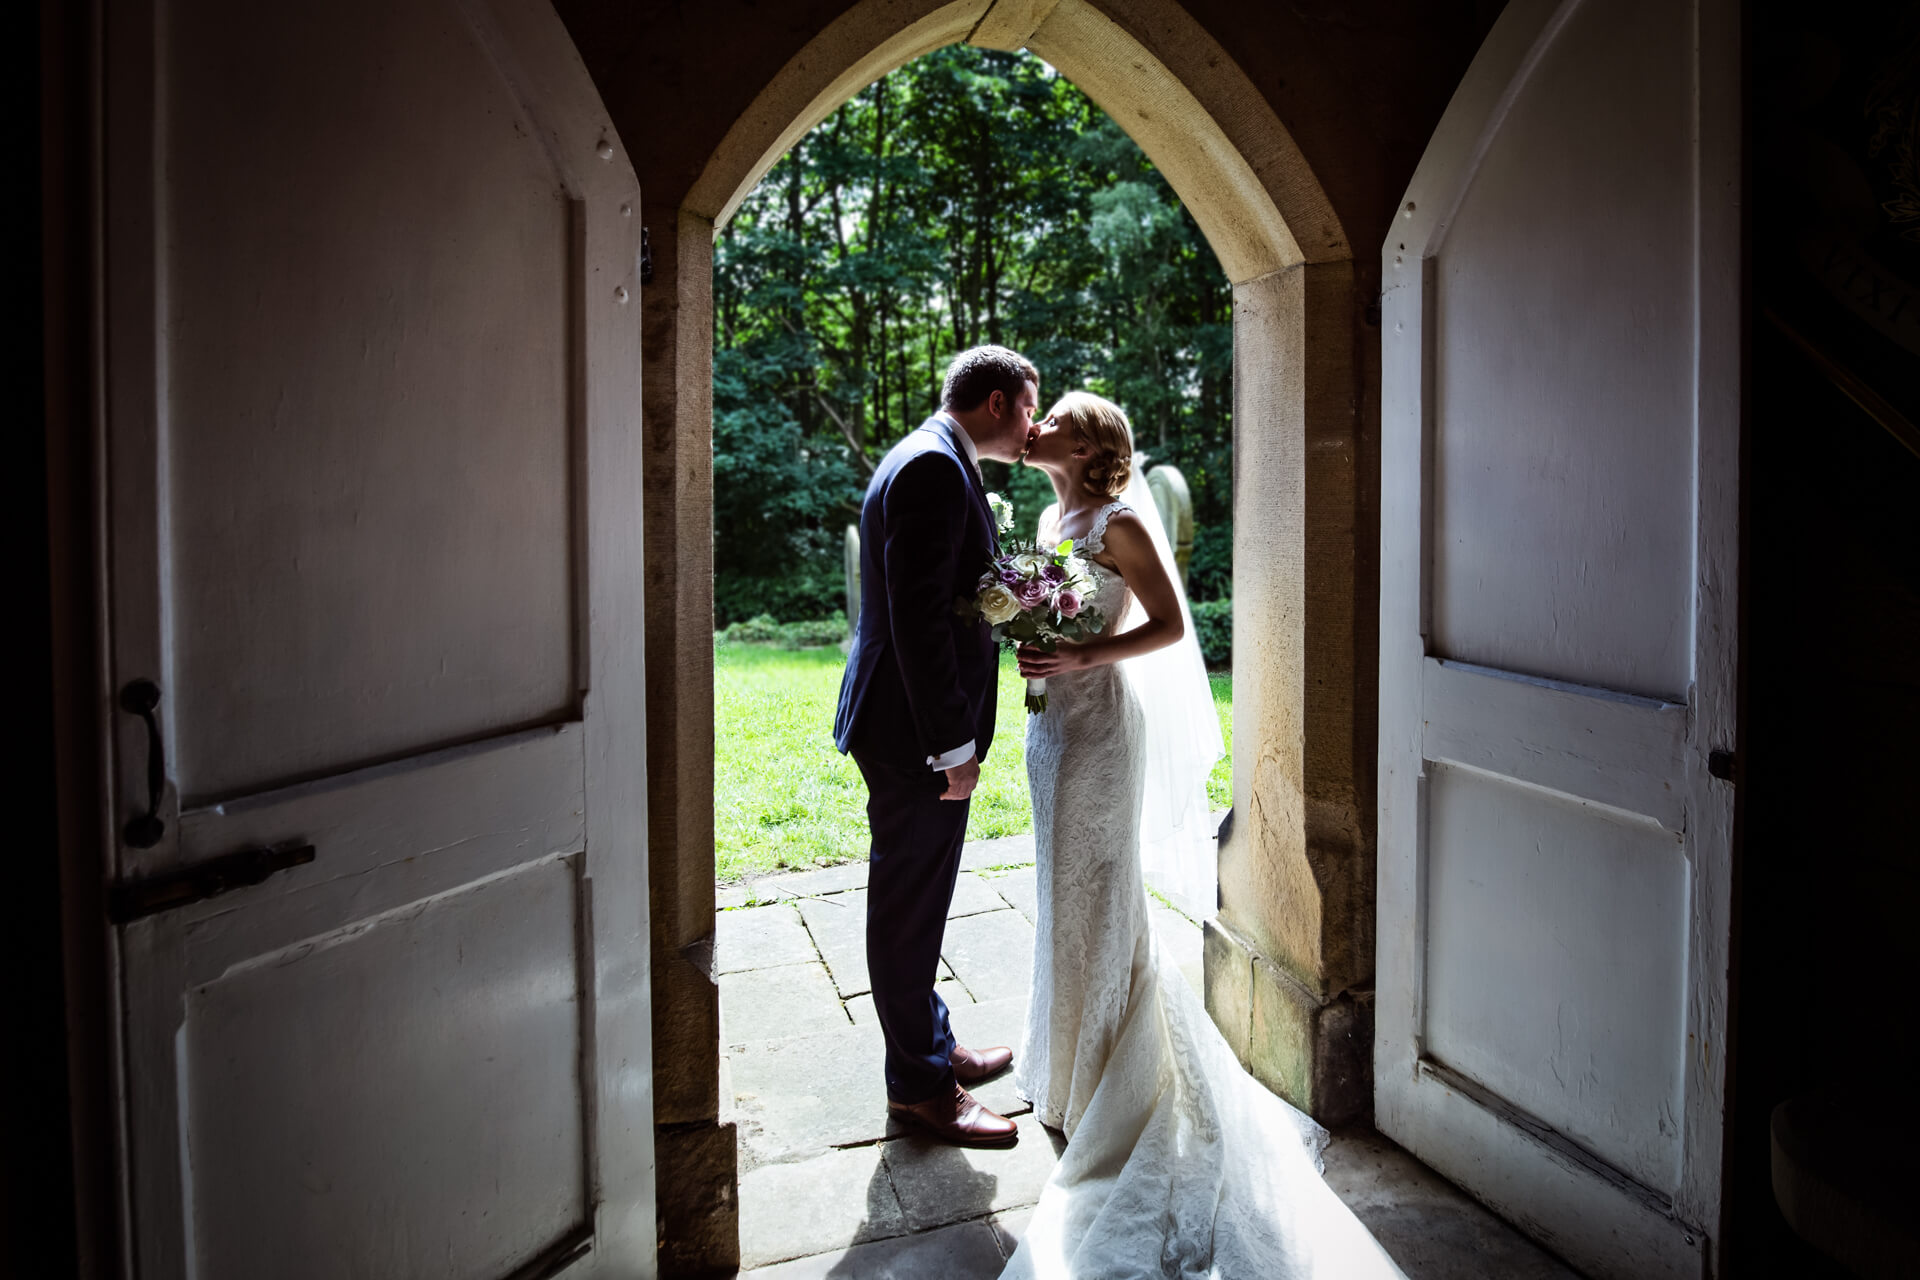 Bride and Groom kissing in the church doorway at Denton Hall